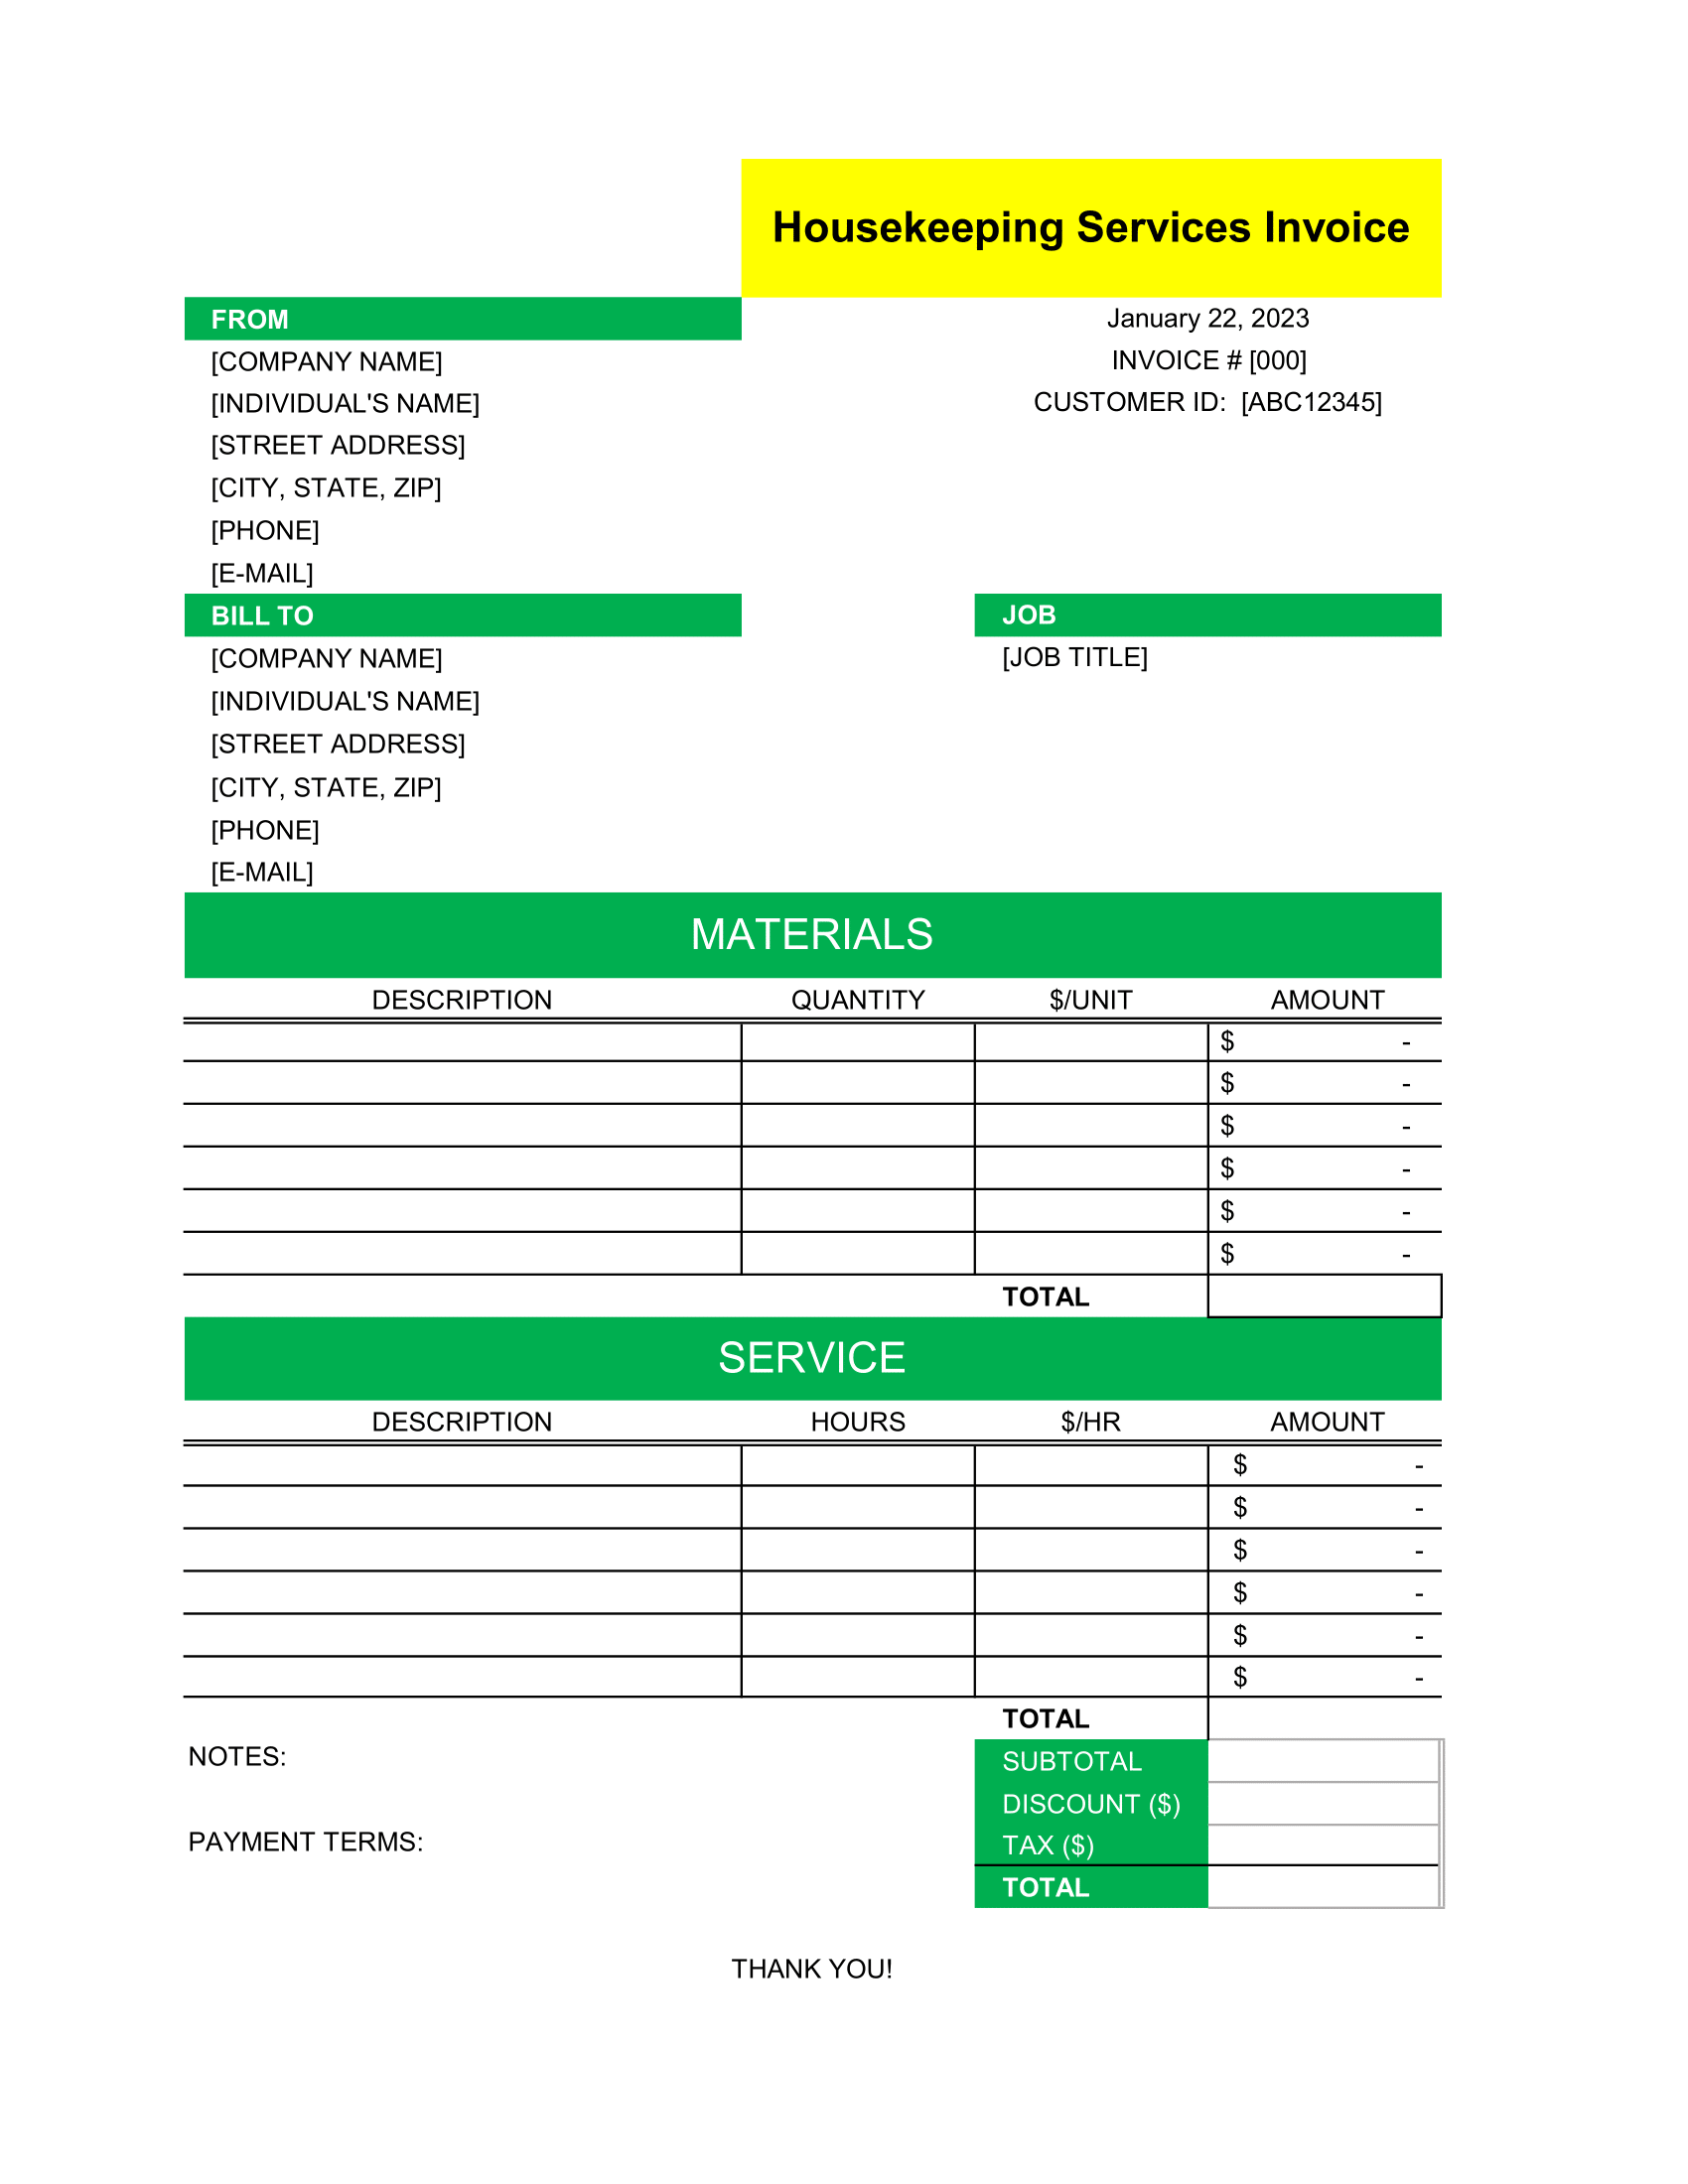 HouseKeeping Services Invoice format in Excel by FOrmatworks